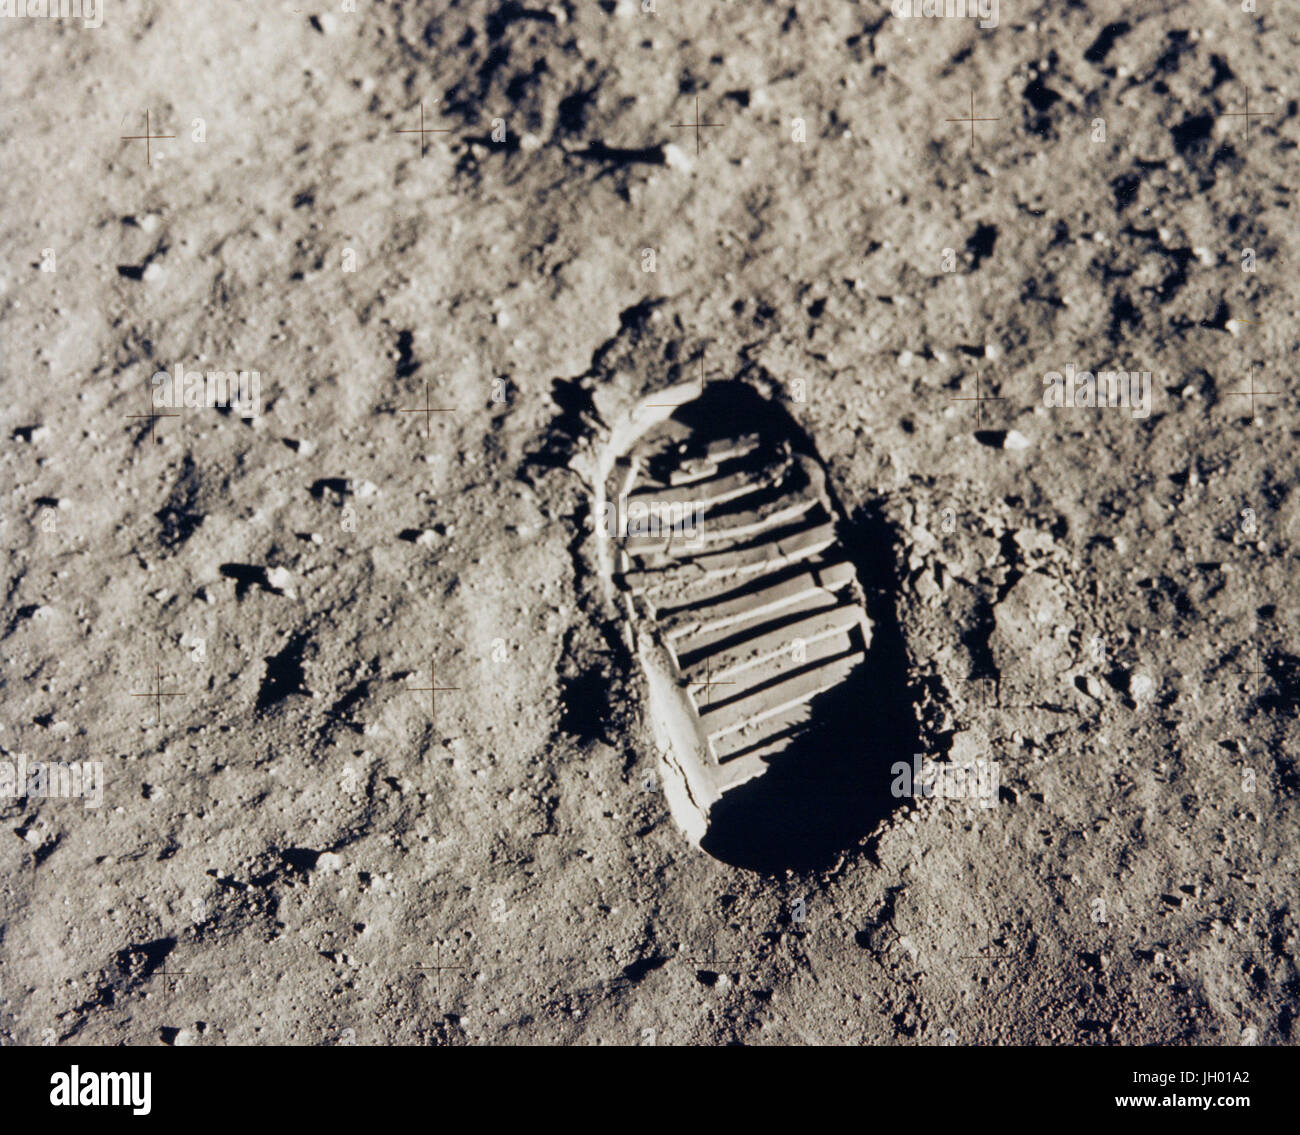 One of the first steps taken on the Moon, this is an image of Buzz Aldrin's bootprint from the Apollo 11 mission. Neil Armstrong and Buzz Aldrin walked on the Moon on July 20, 1969. NASA Photo Stock Photo